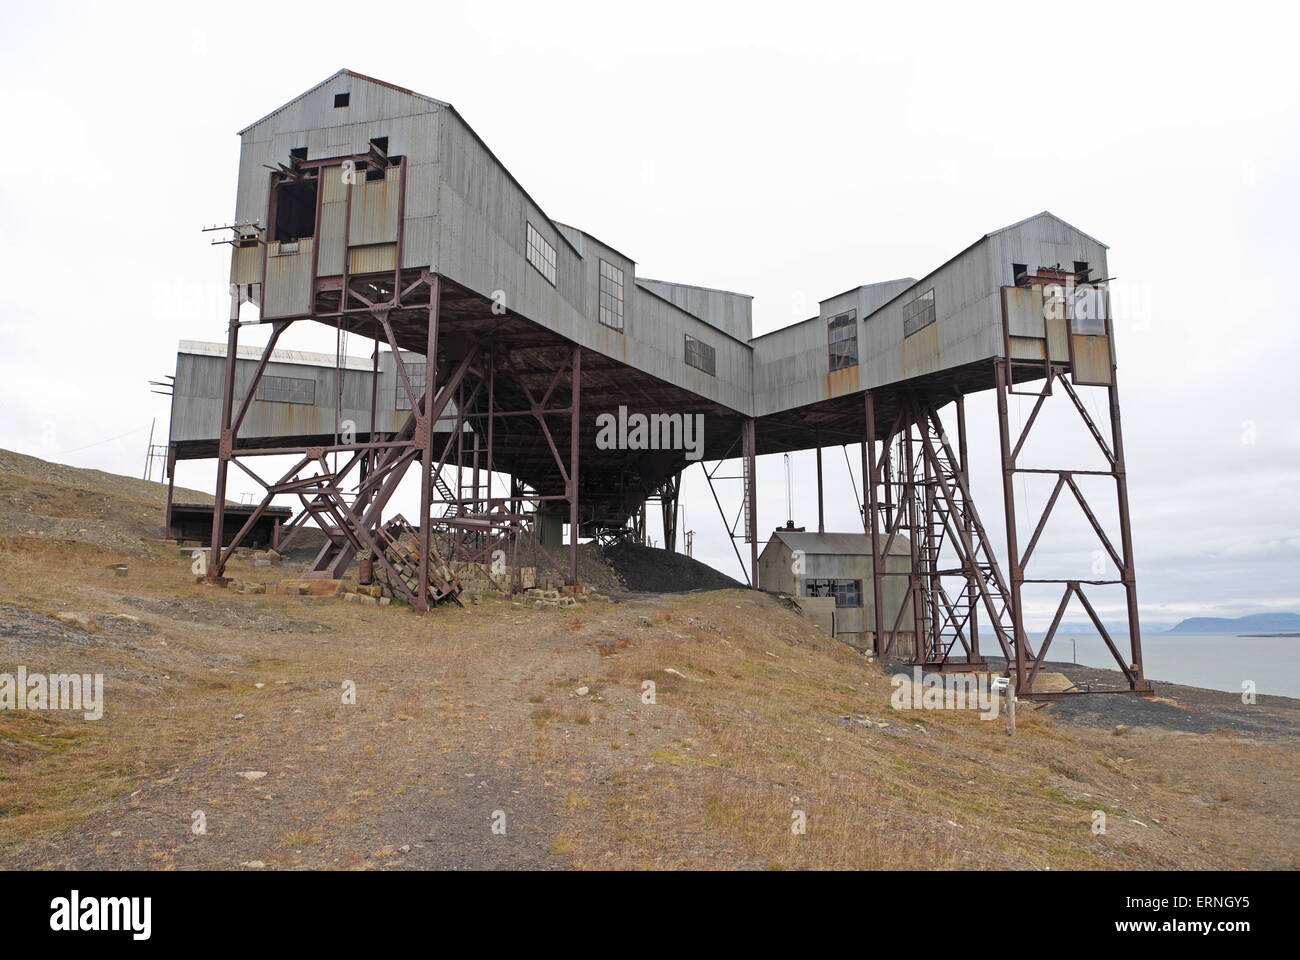 The disused aerial tramway centre building, above Longyearbyen, Spitzbergen, Svalbard. Stock Photo